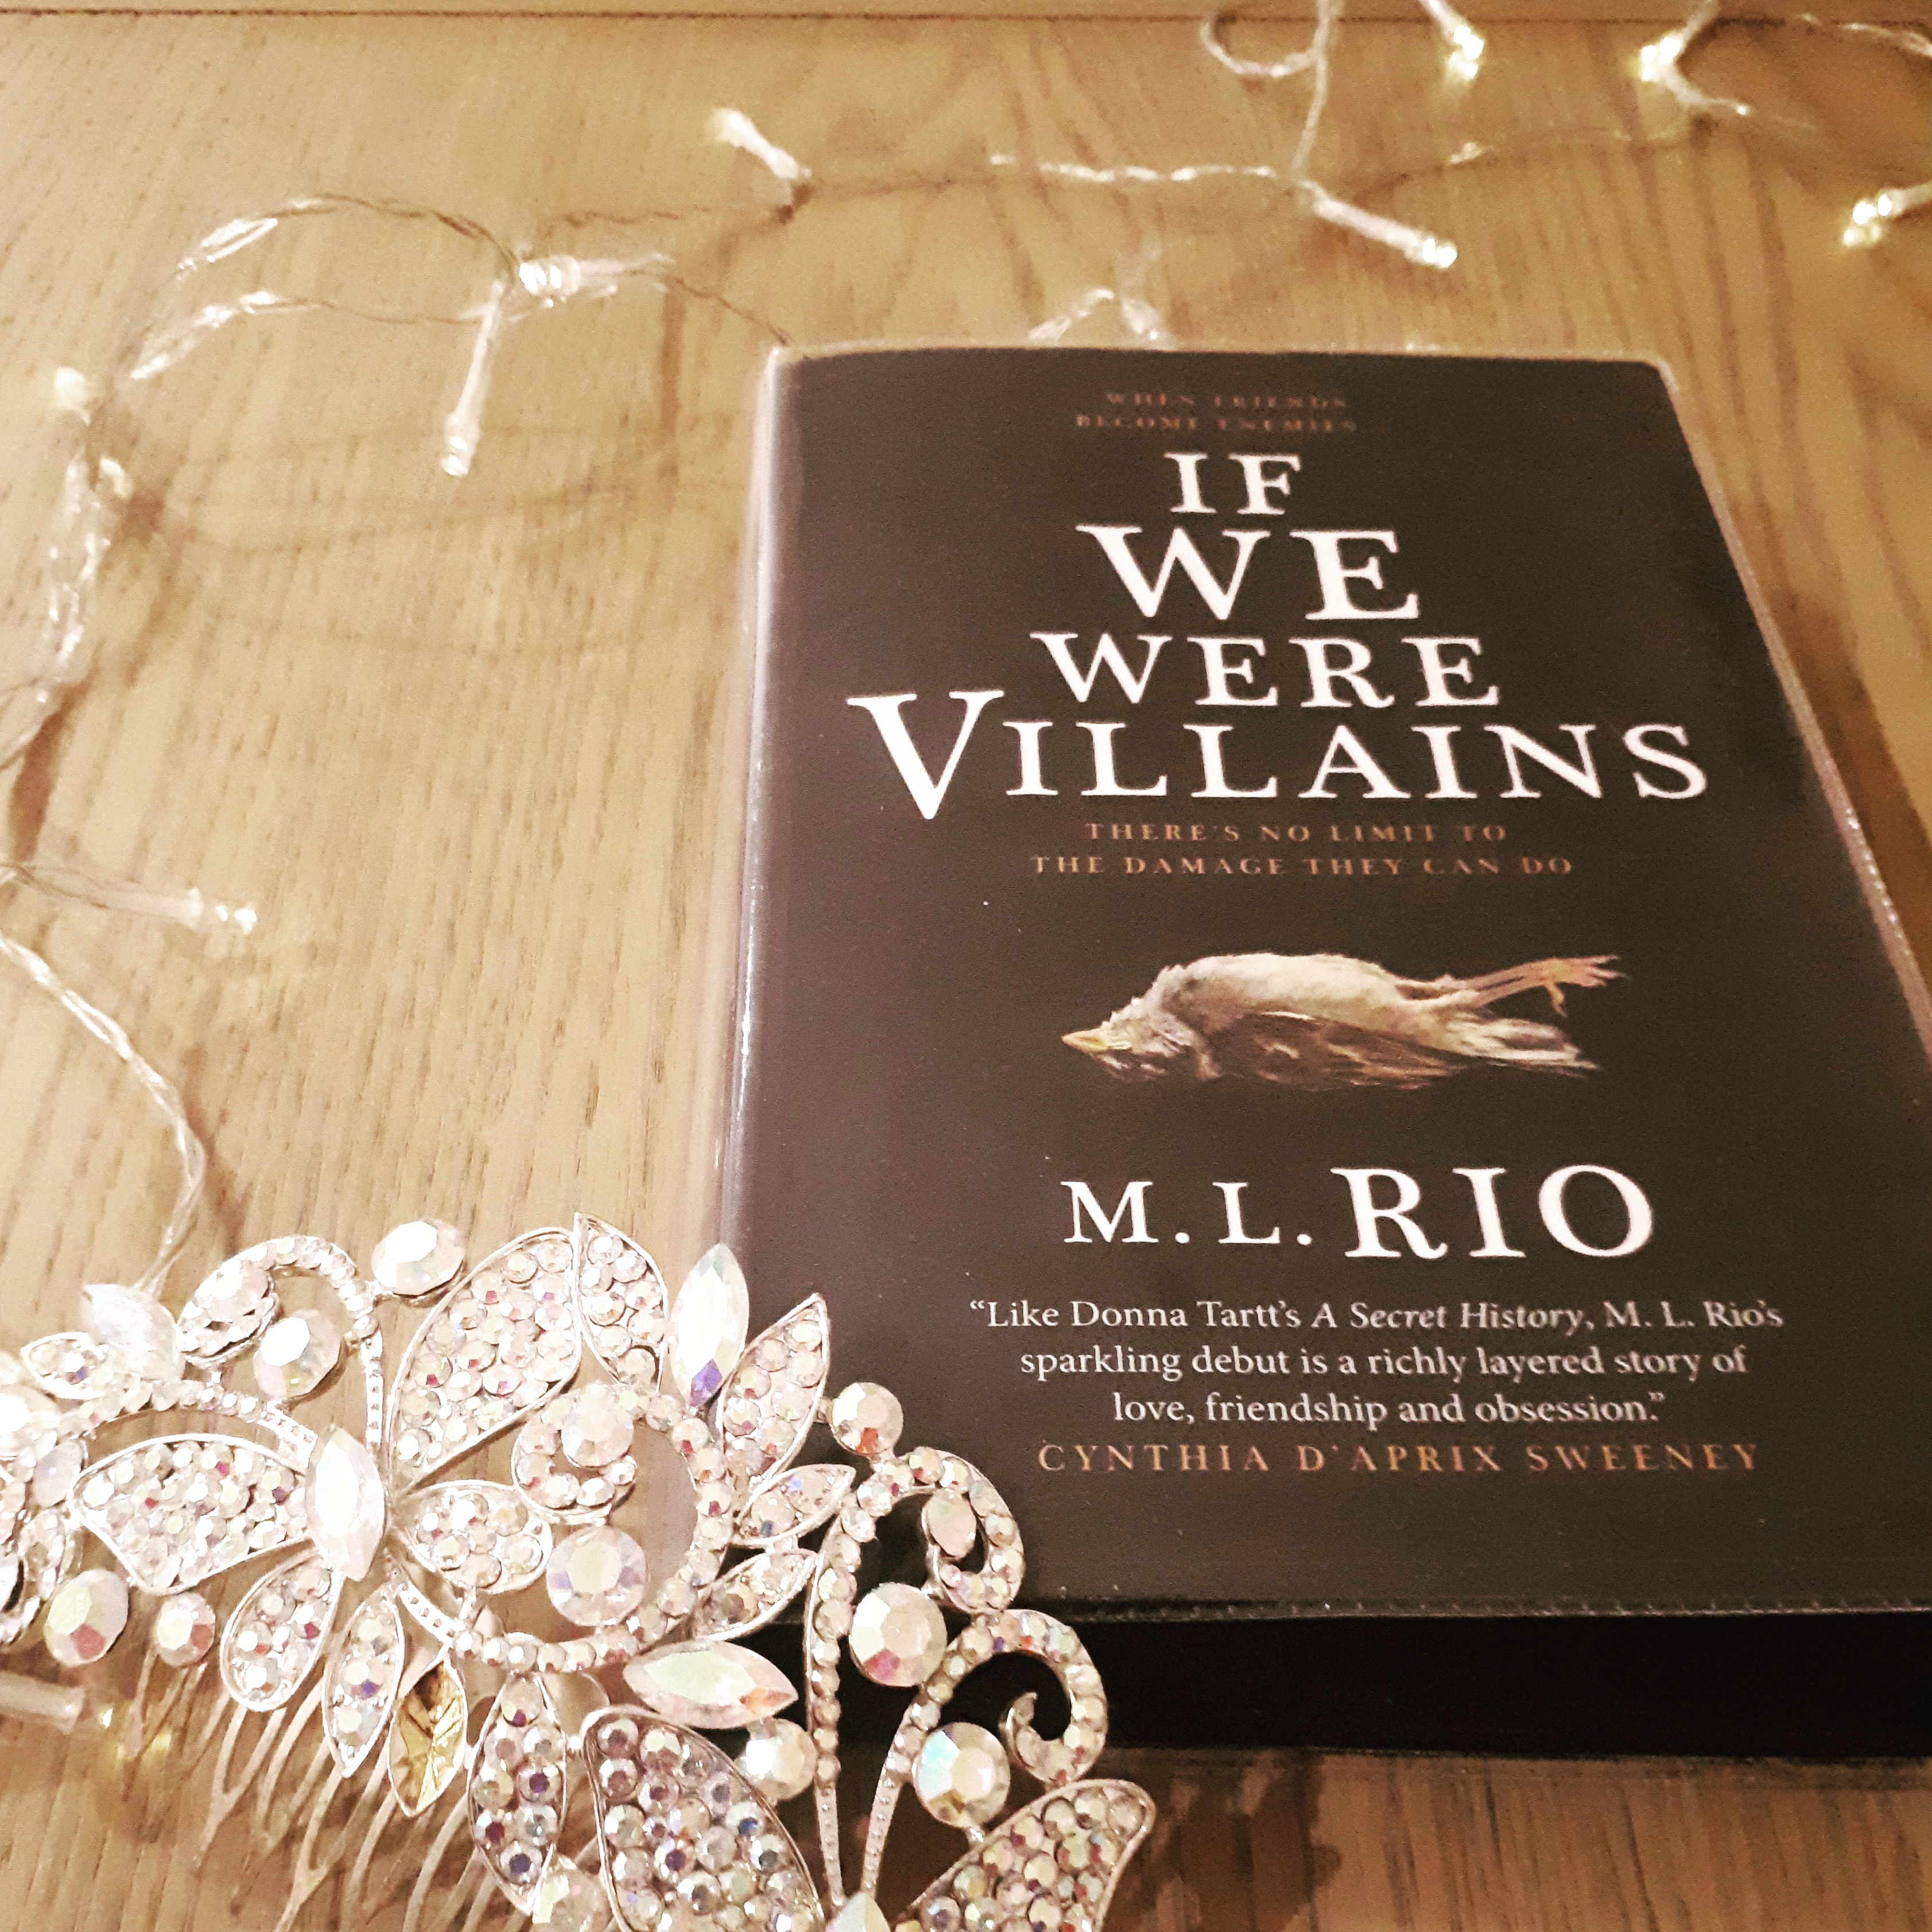 If We Were Villains : A Novel by M. L. Rio (2018, Trade Paperback